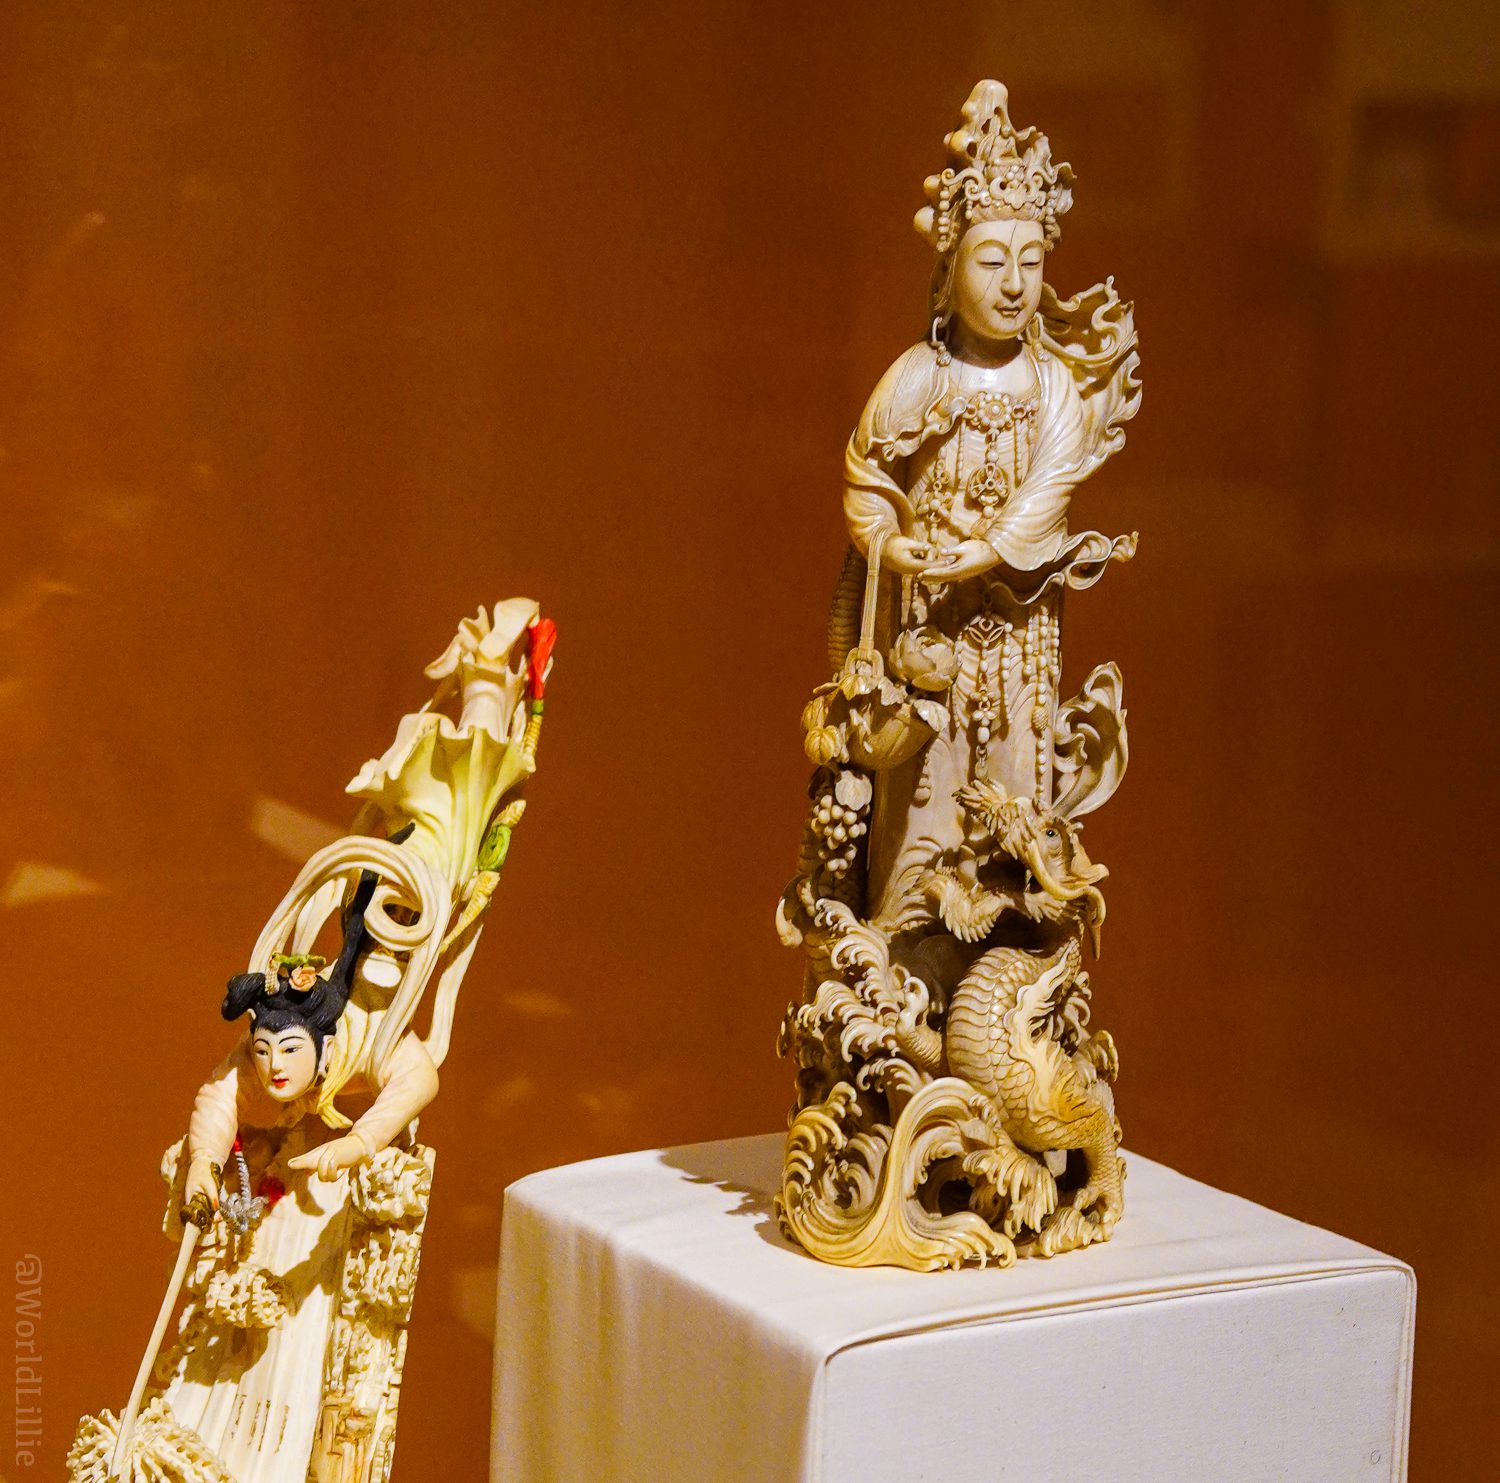 Ornate Chinese carvings.